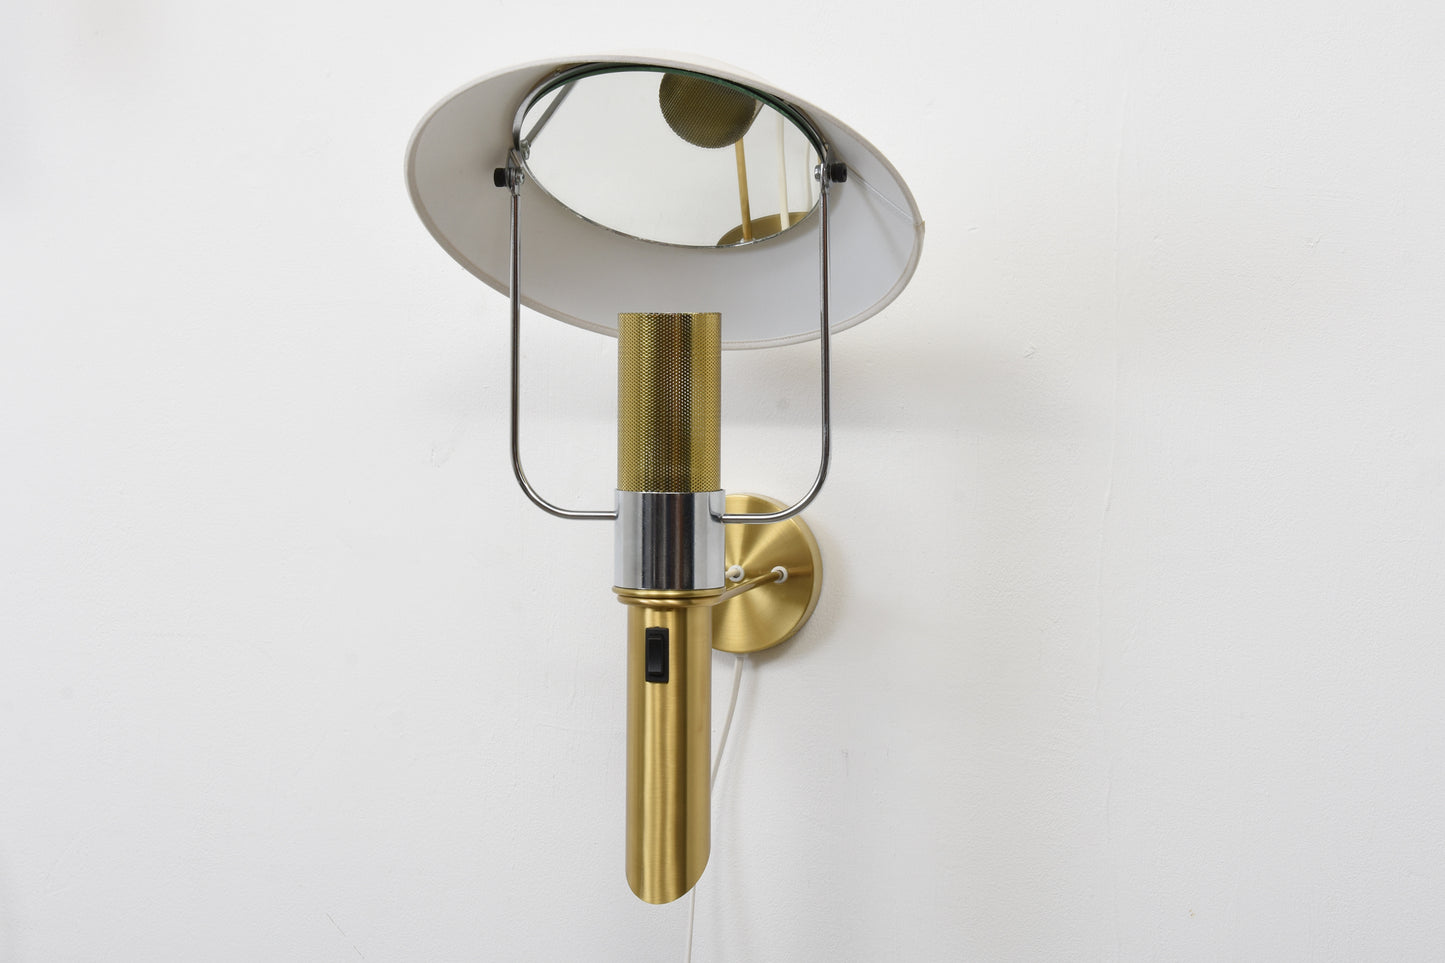 Two available: 1980s wall lights by Örsjö Belysning